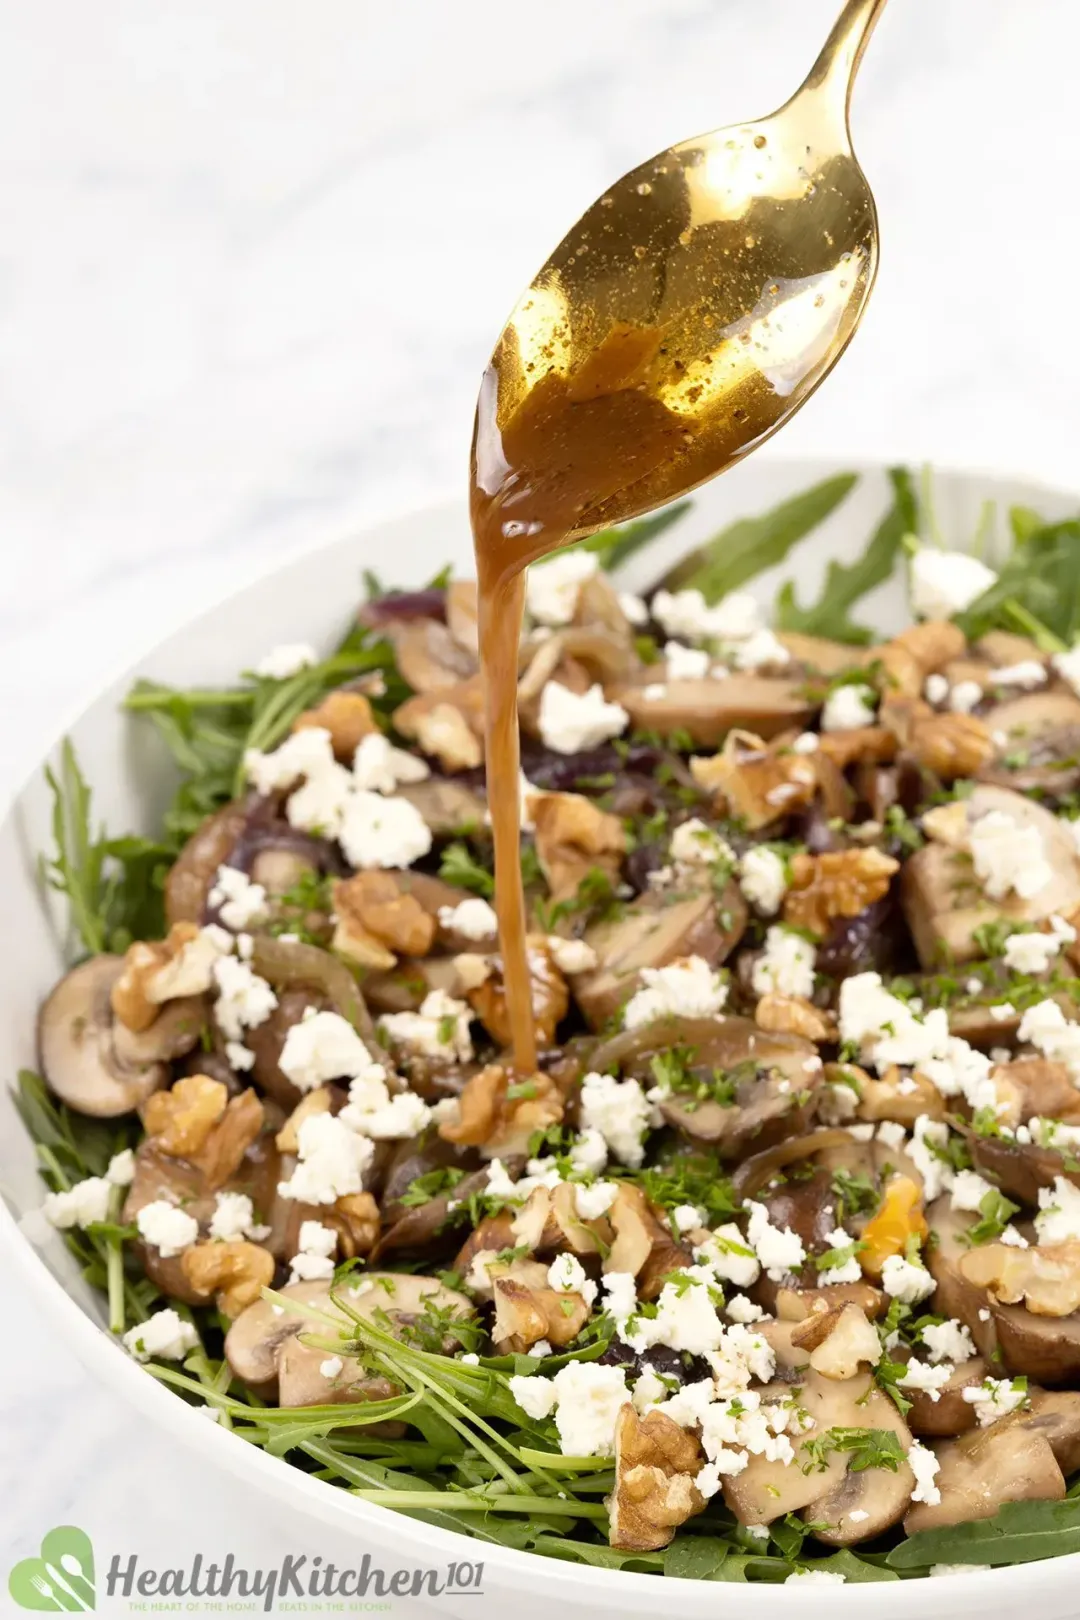 A bowl of mushroom salad with sliced mushrooms, walnuts, cheese, and dressing on top.